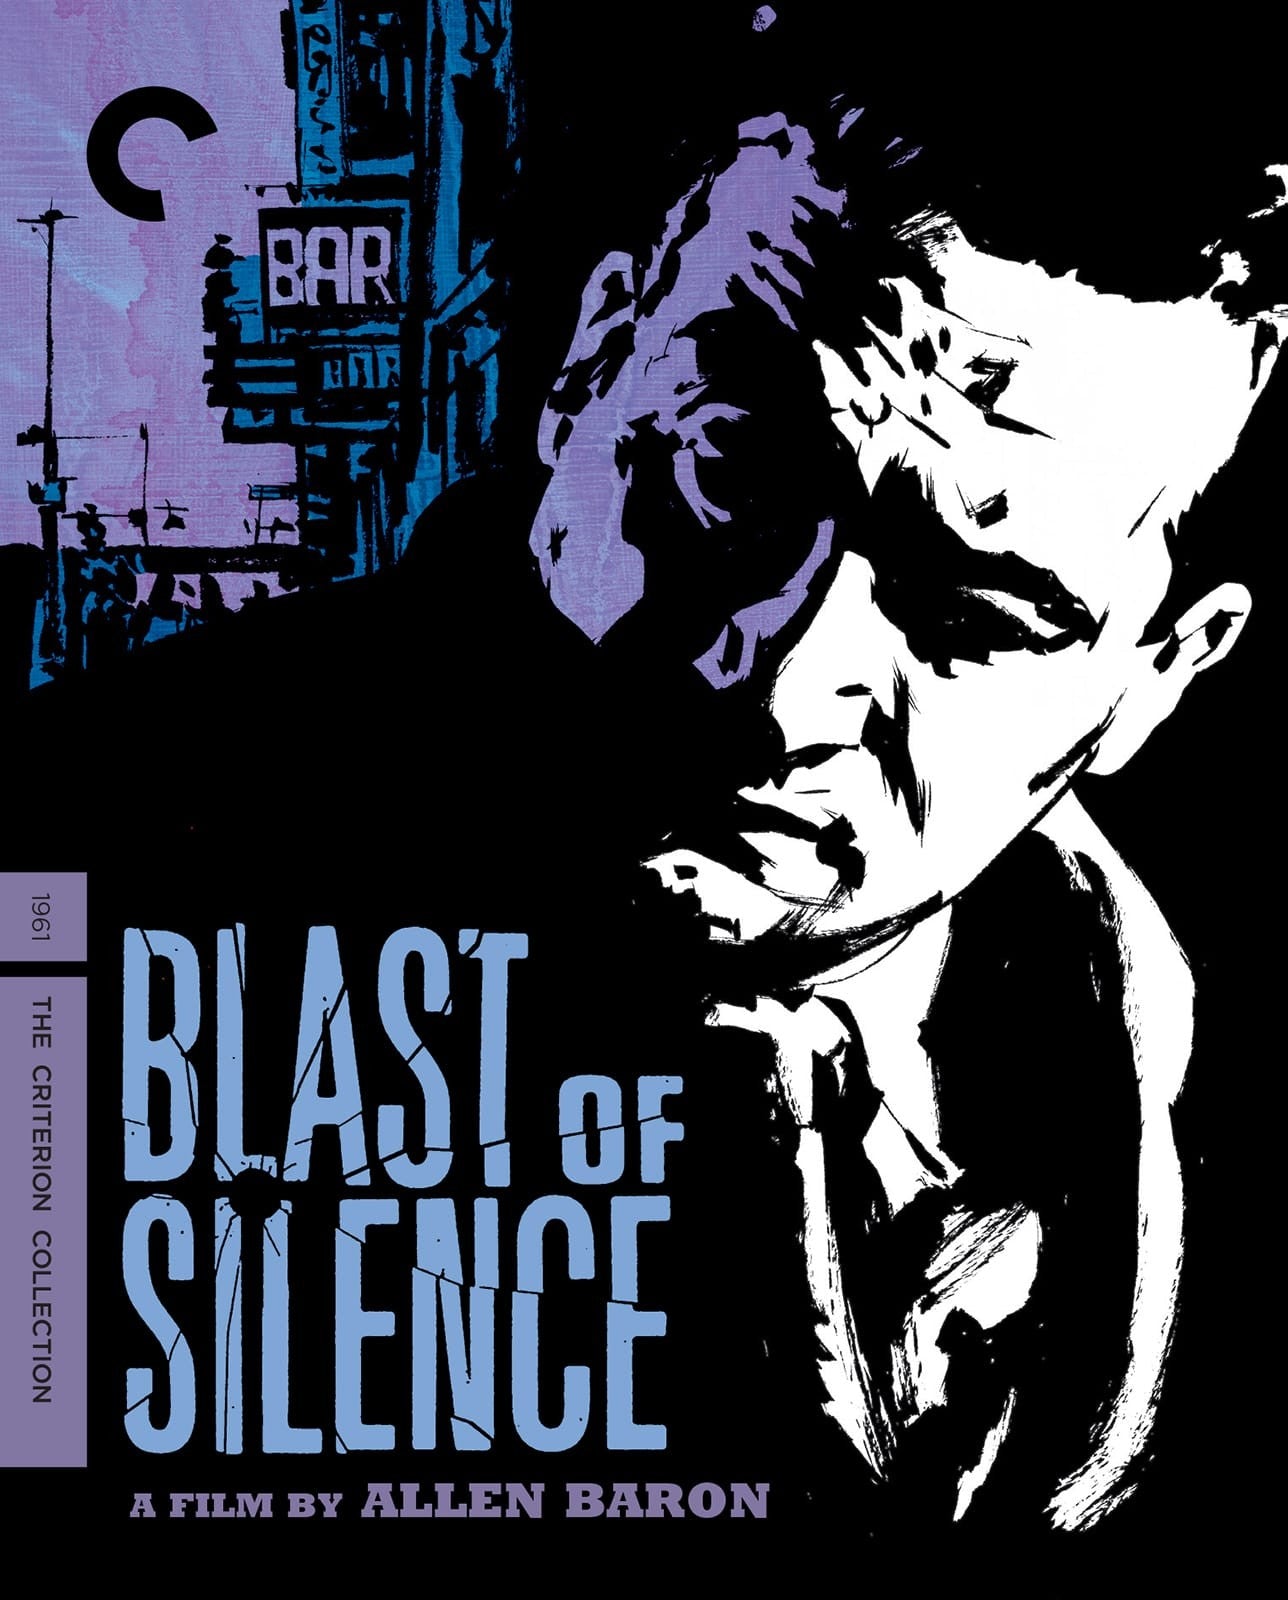 Blast of Silence Blu-ray (Criterion Collection) [Preorder]